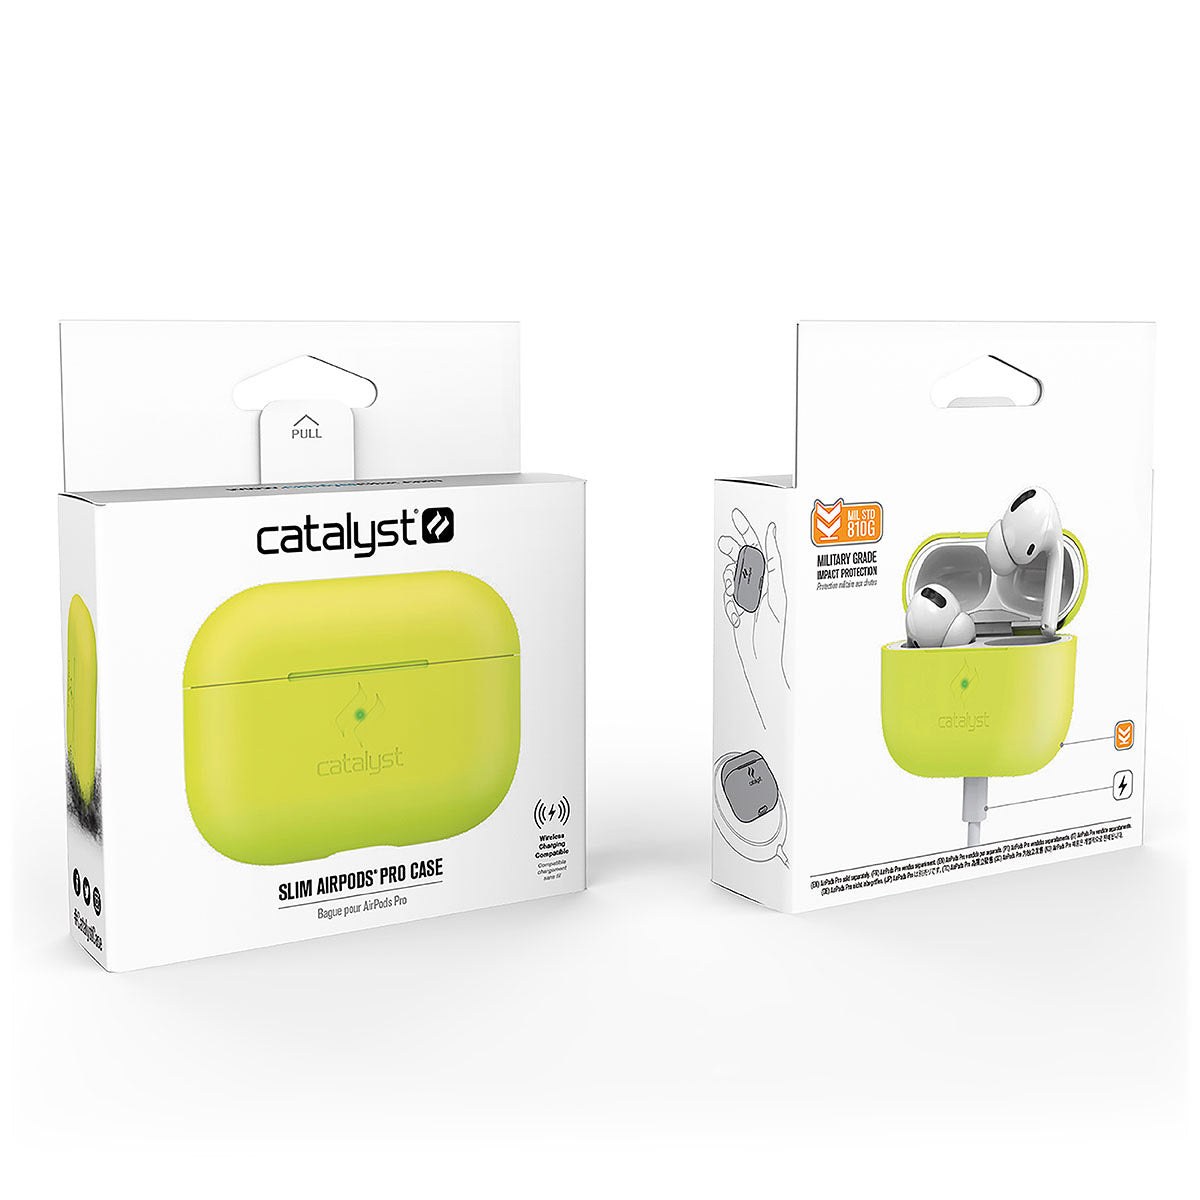 catalyst-airpods-pro-gen-2-1-slim-case-showing-the-front-and-back-view-of-the-packaging-in-a-neon-yellow-colorway   Catalyst airpods pro gen 2/1 slim case showing the front and back view of the packaging in a neon yellow colorway